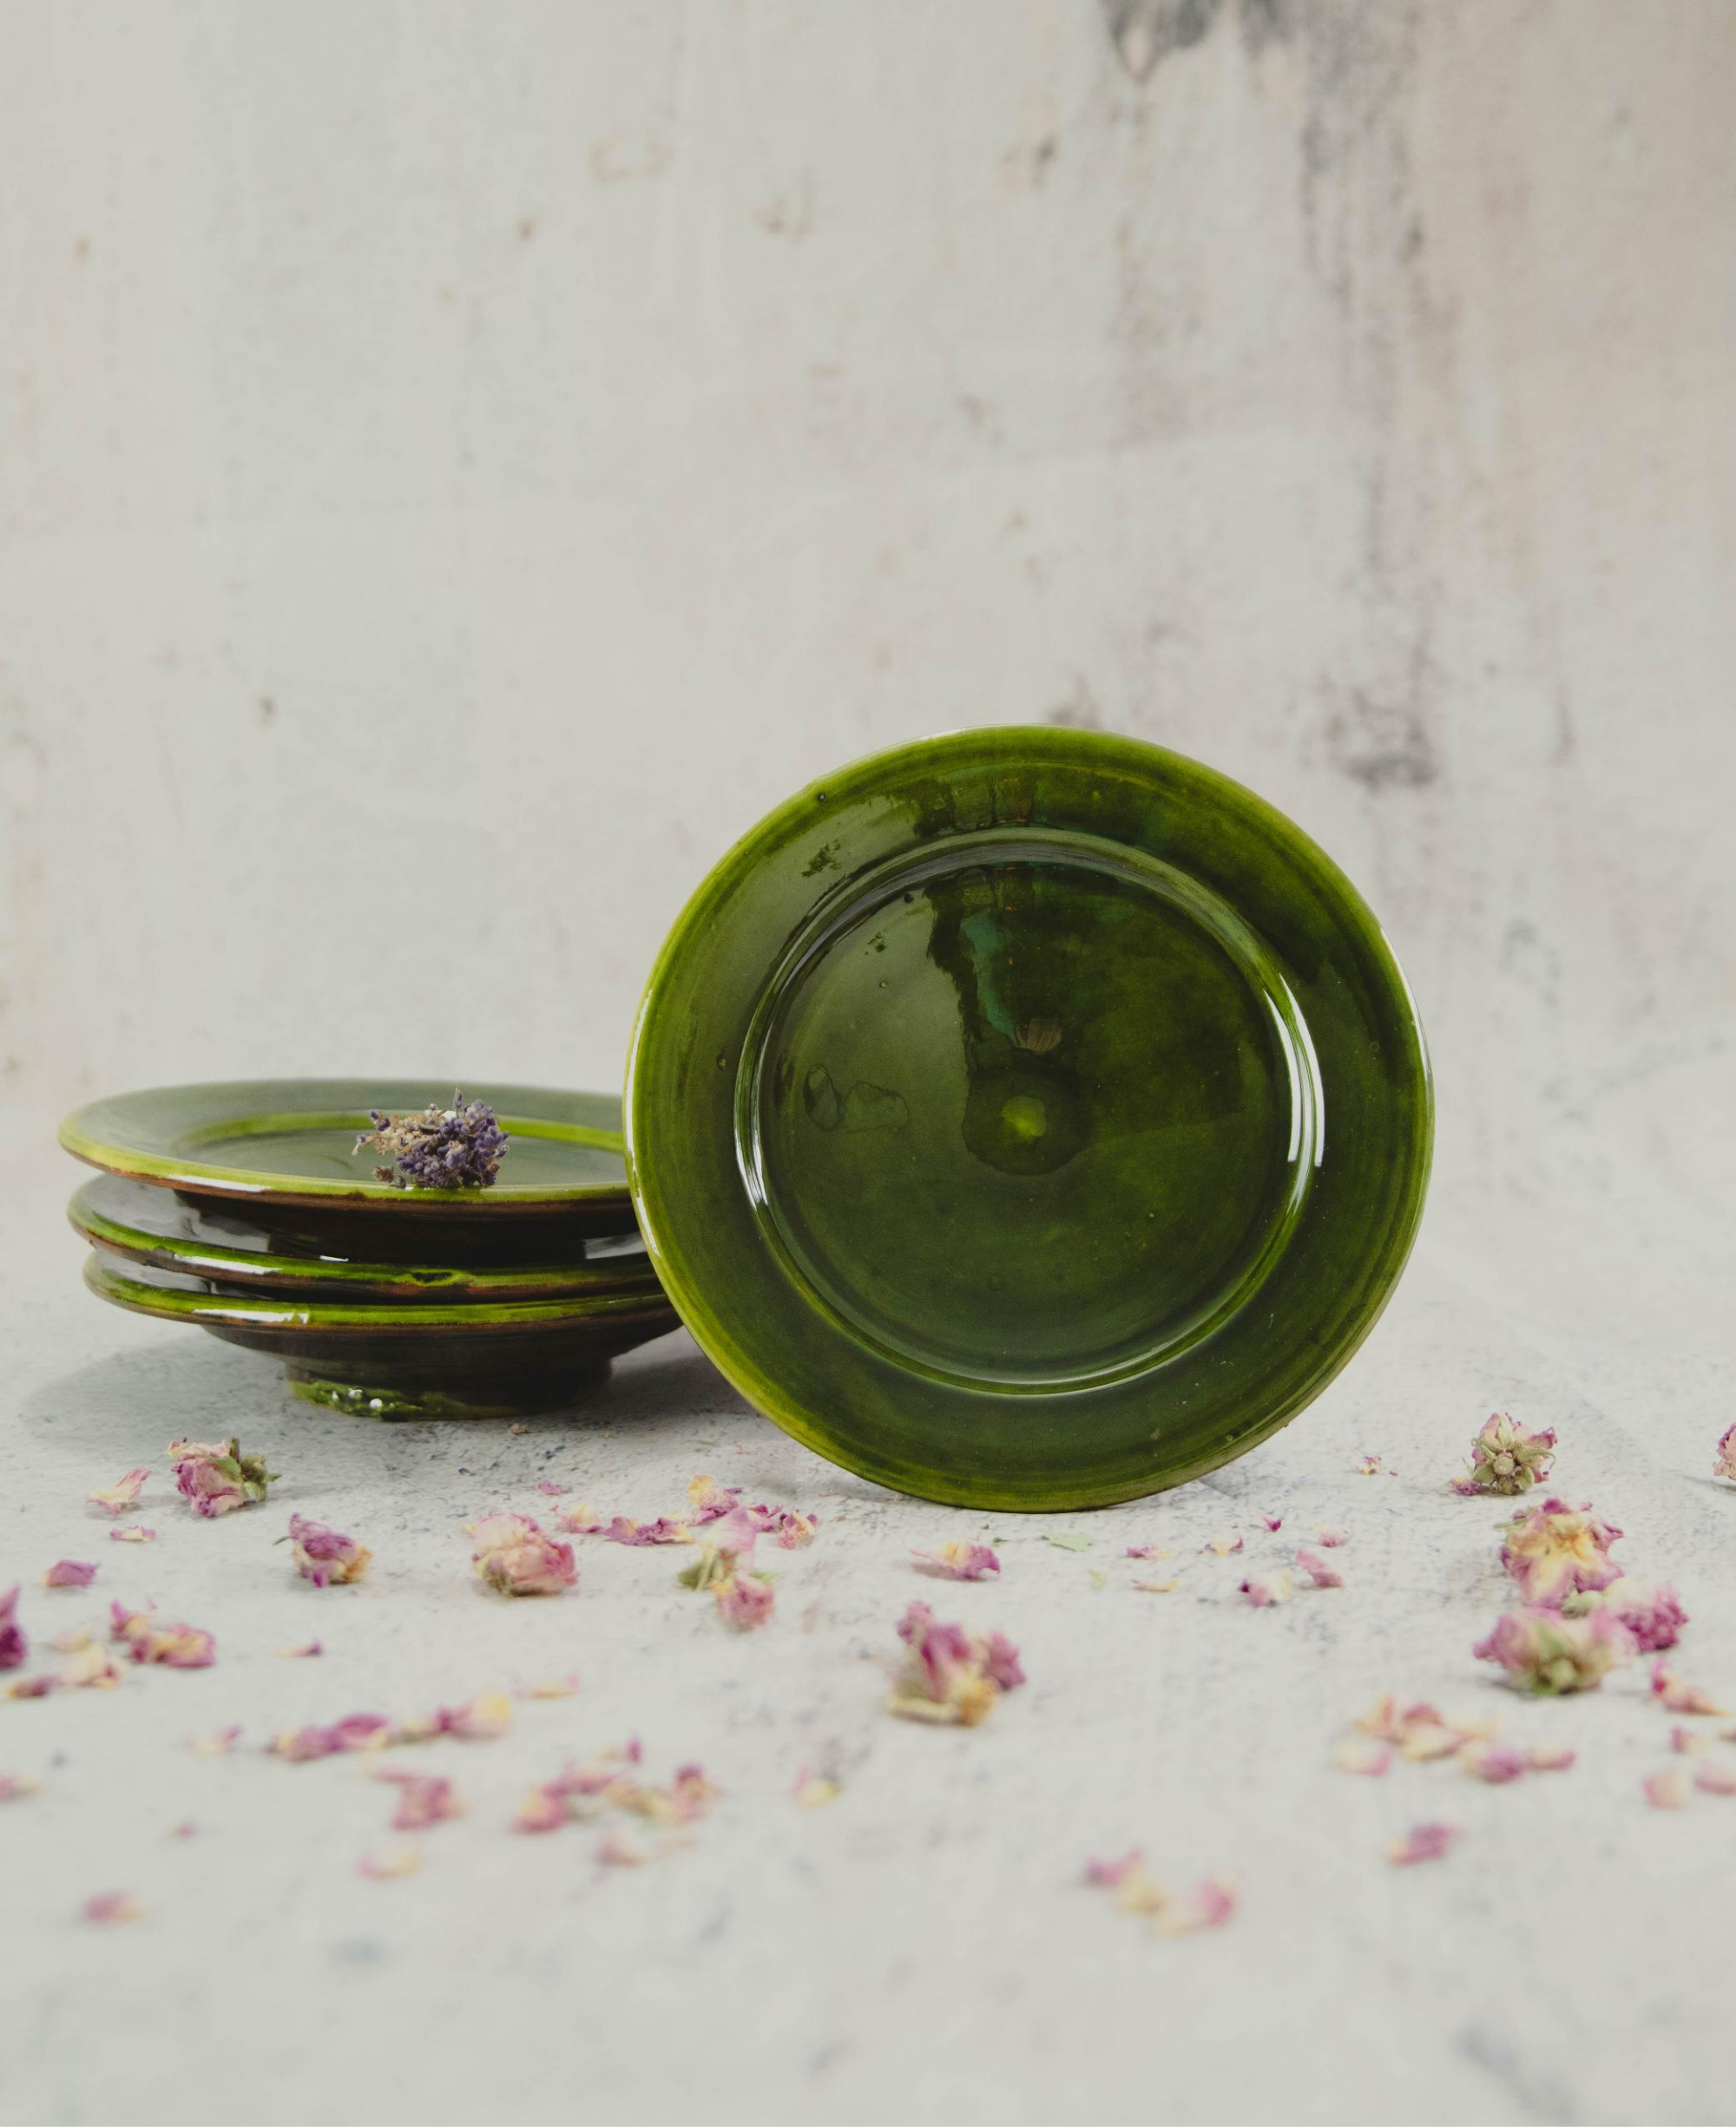 Moroccan Vintage Tamegroute Green Side Plate: Handmade Ceramic Dinnerware for Stylish and Sustainable Dining 